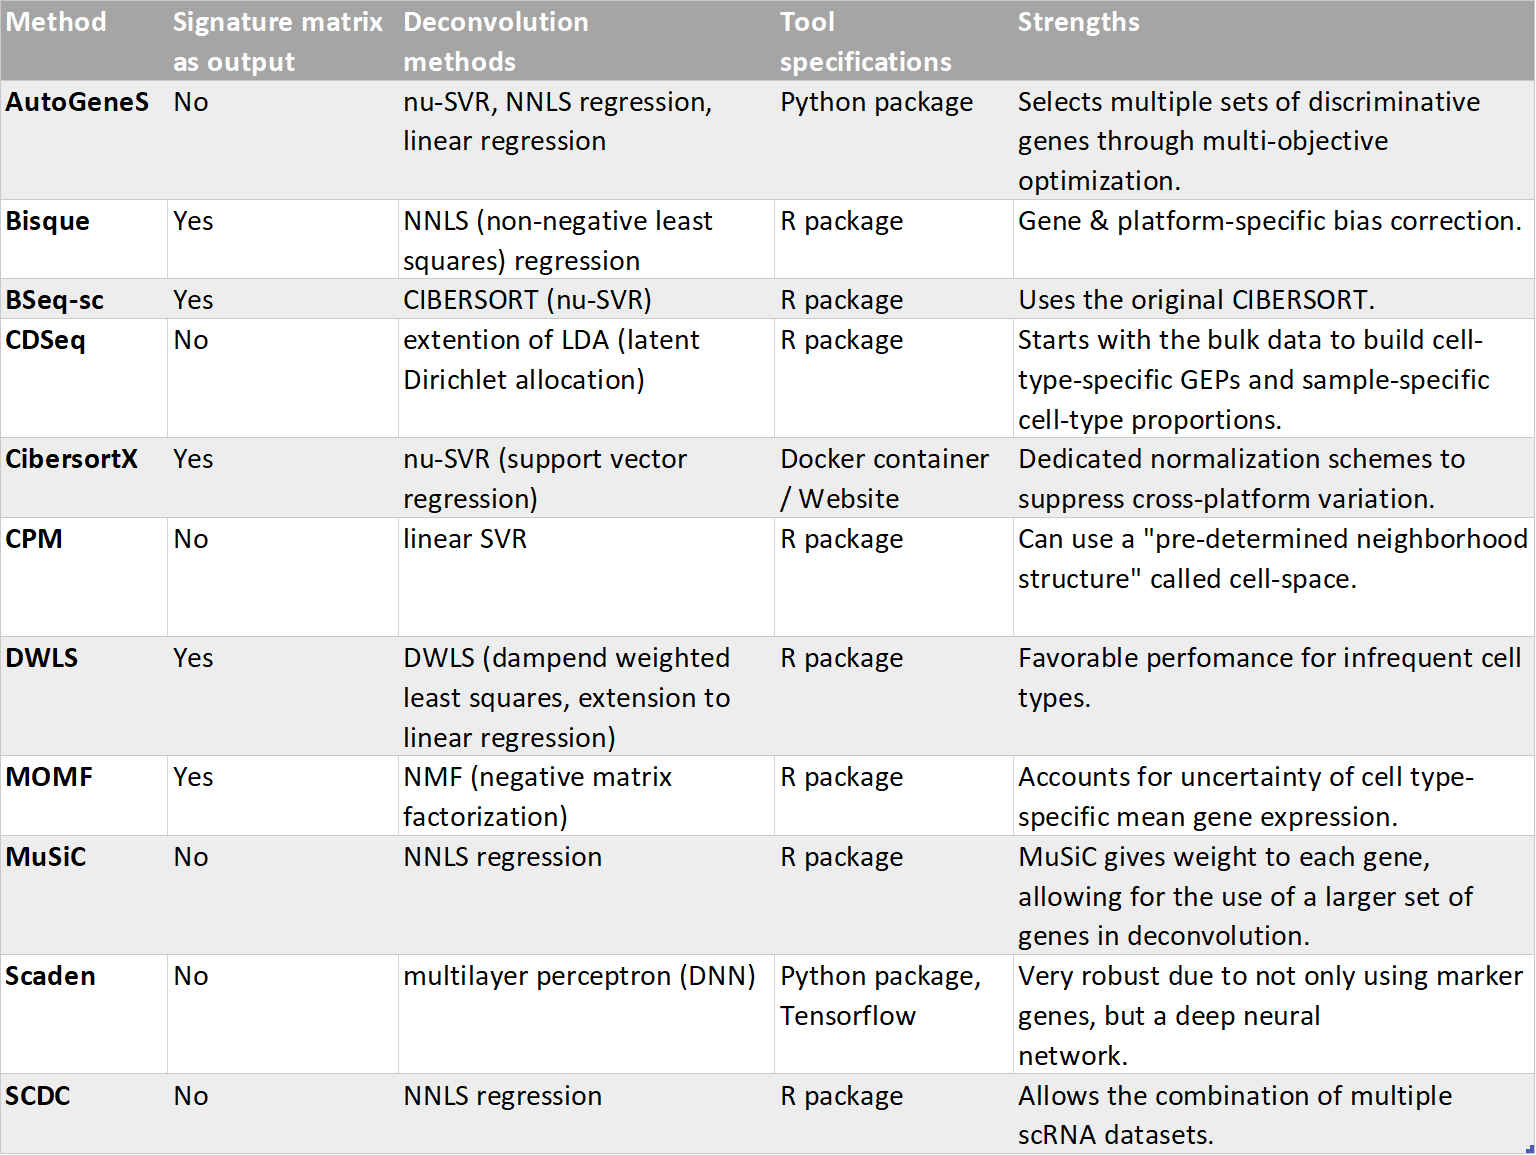 Table 4: Comparison of the methodes used in the package.